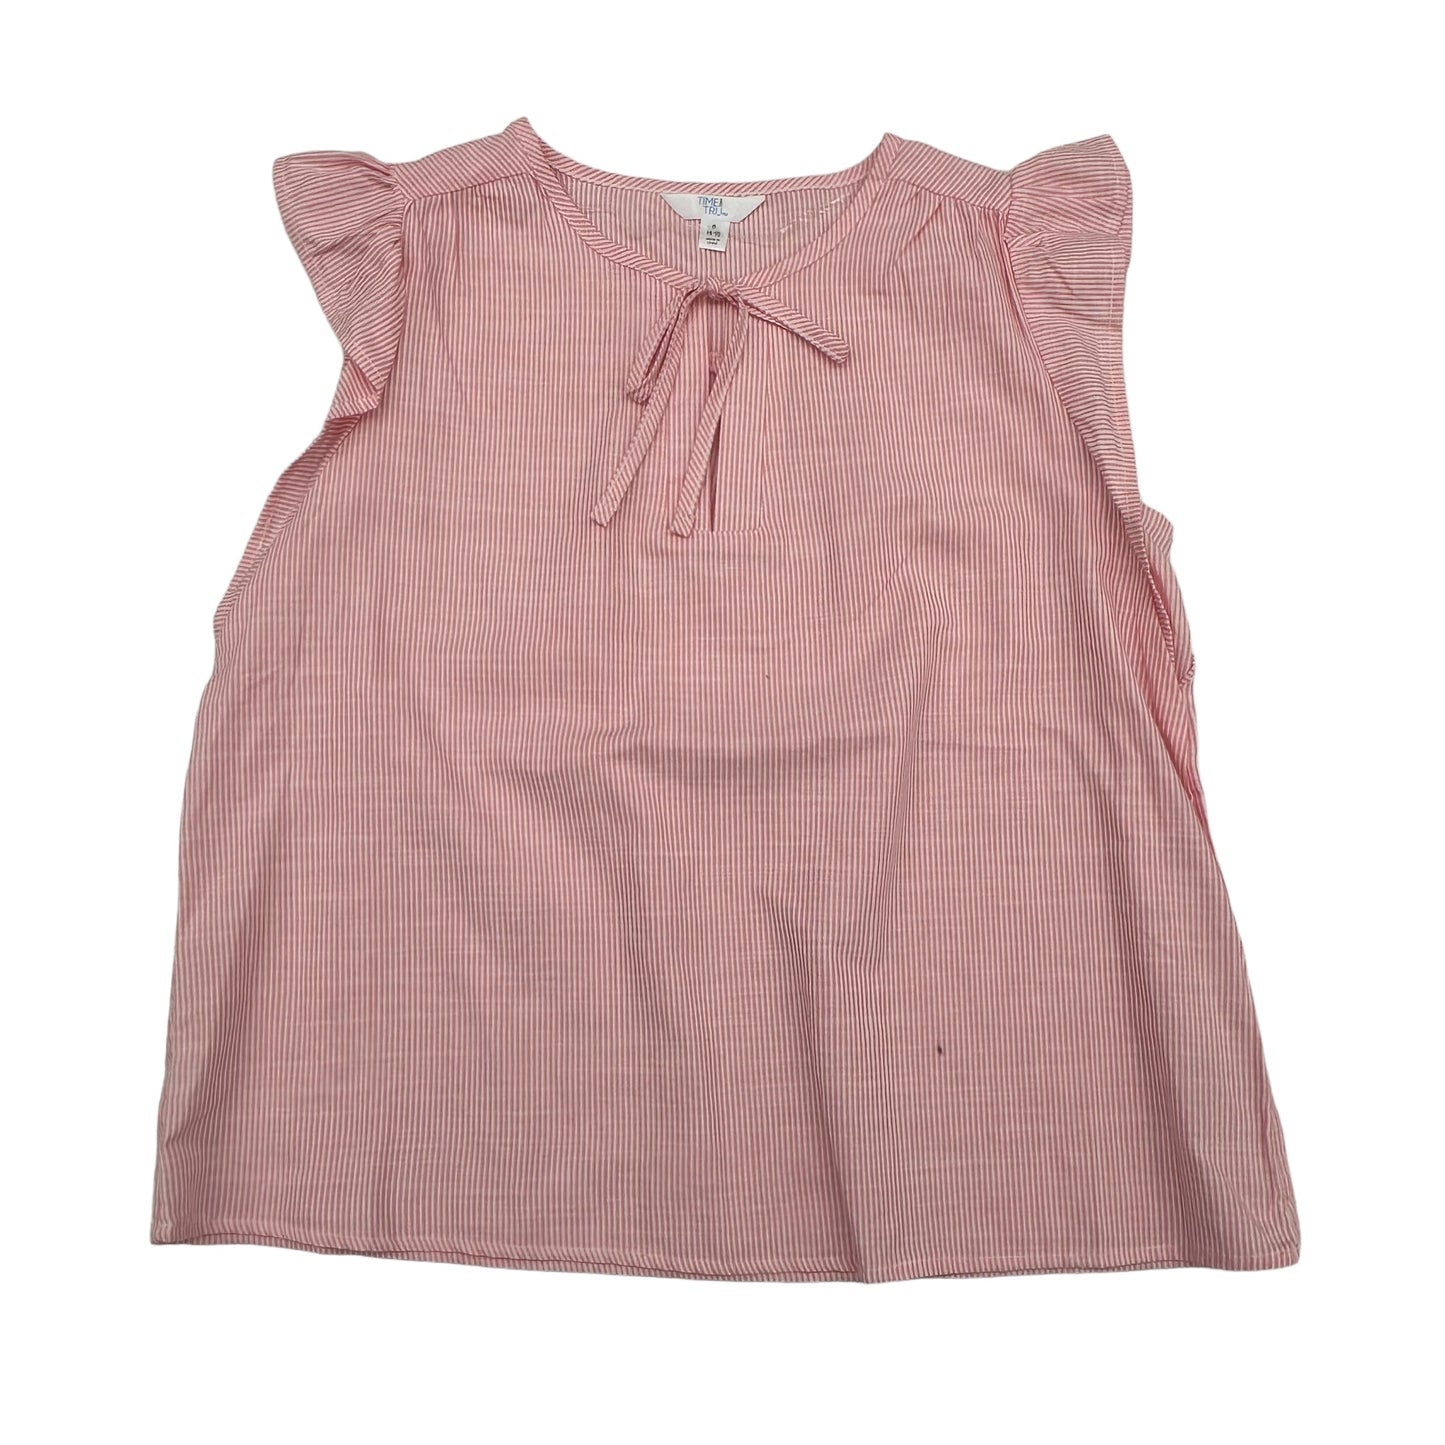 PINK TIME AND TRU TOP SS, Size S